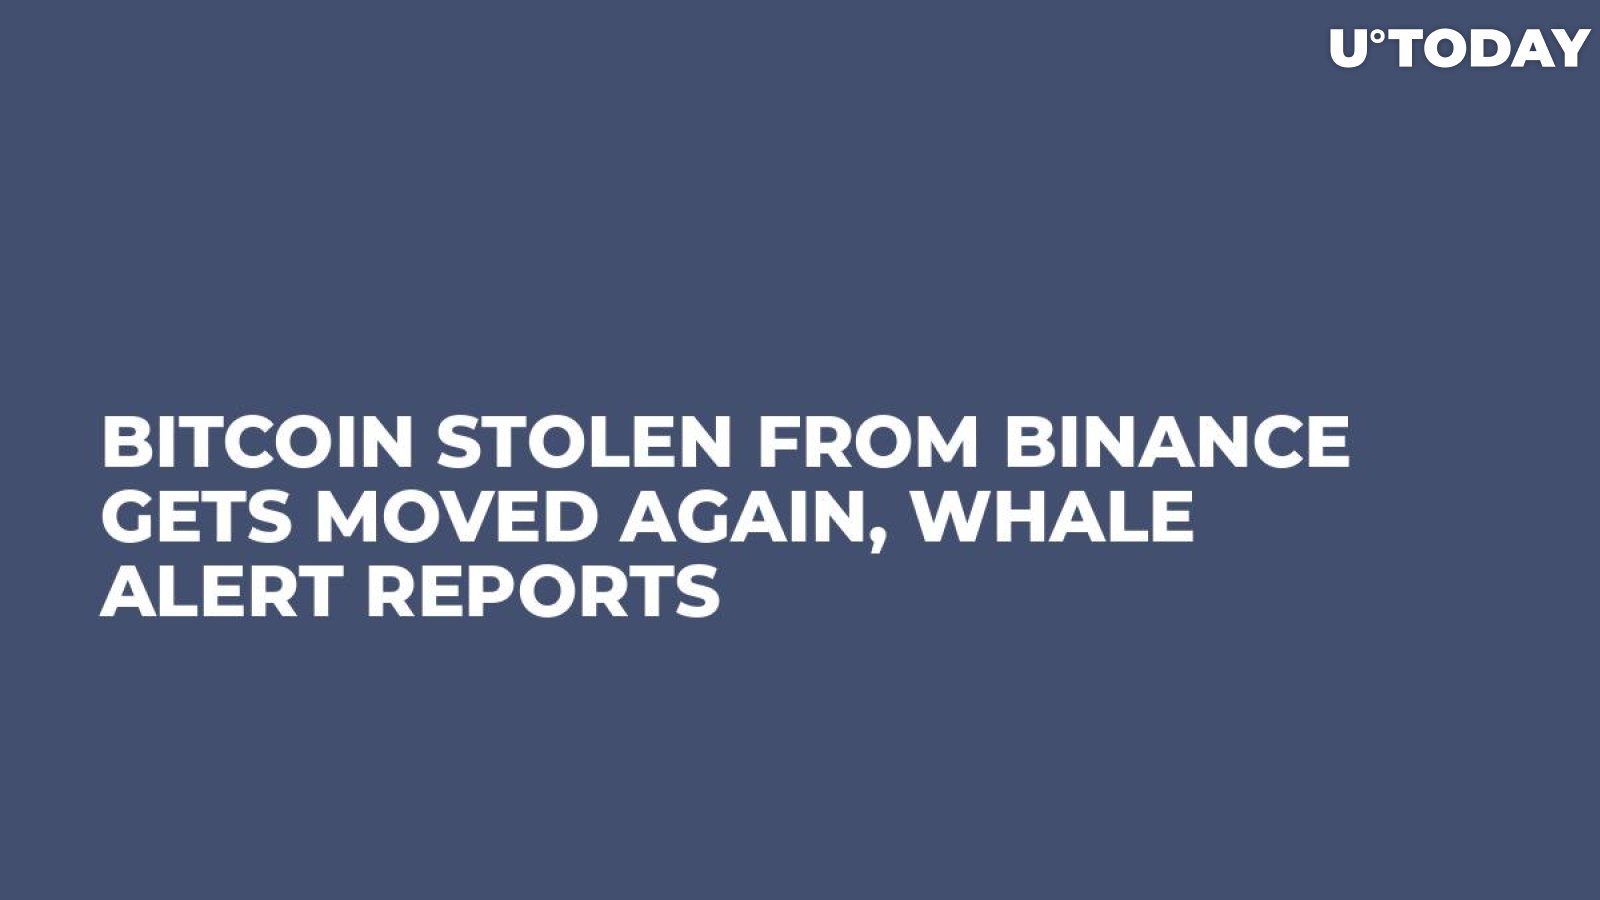 Bitcoin Stolen from Binance Gets Moved Again, Whale Alert Reports